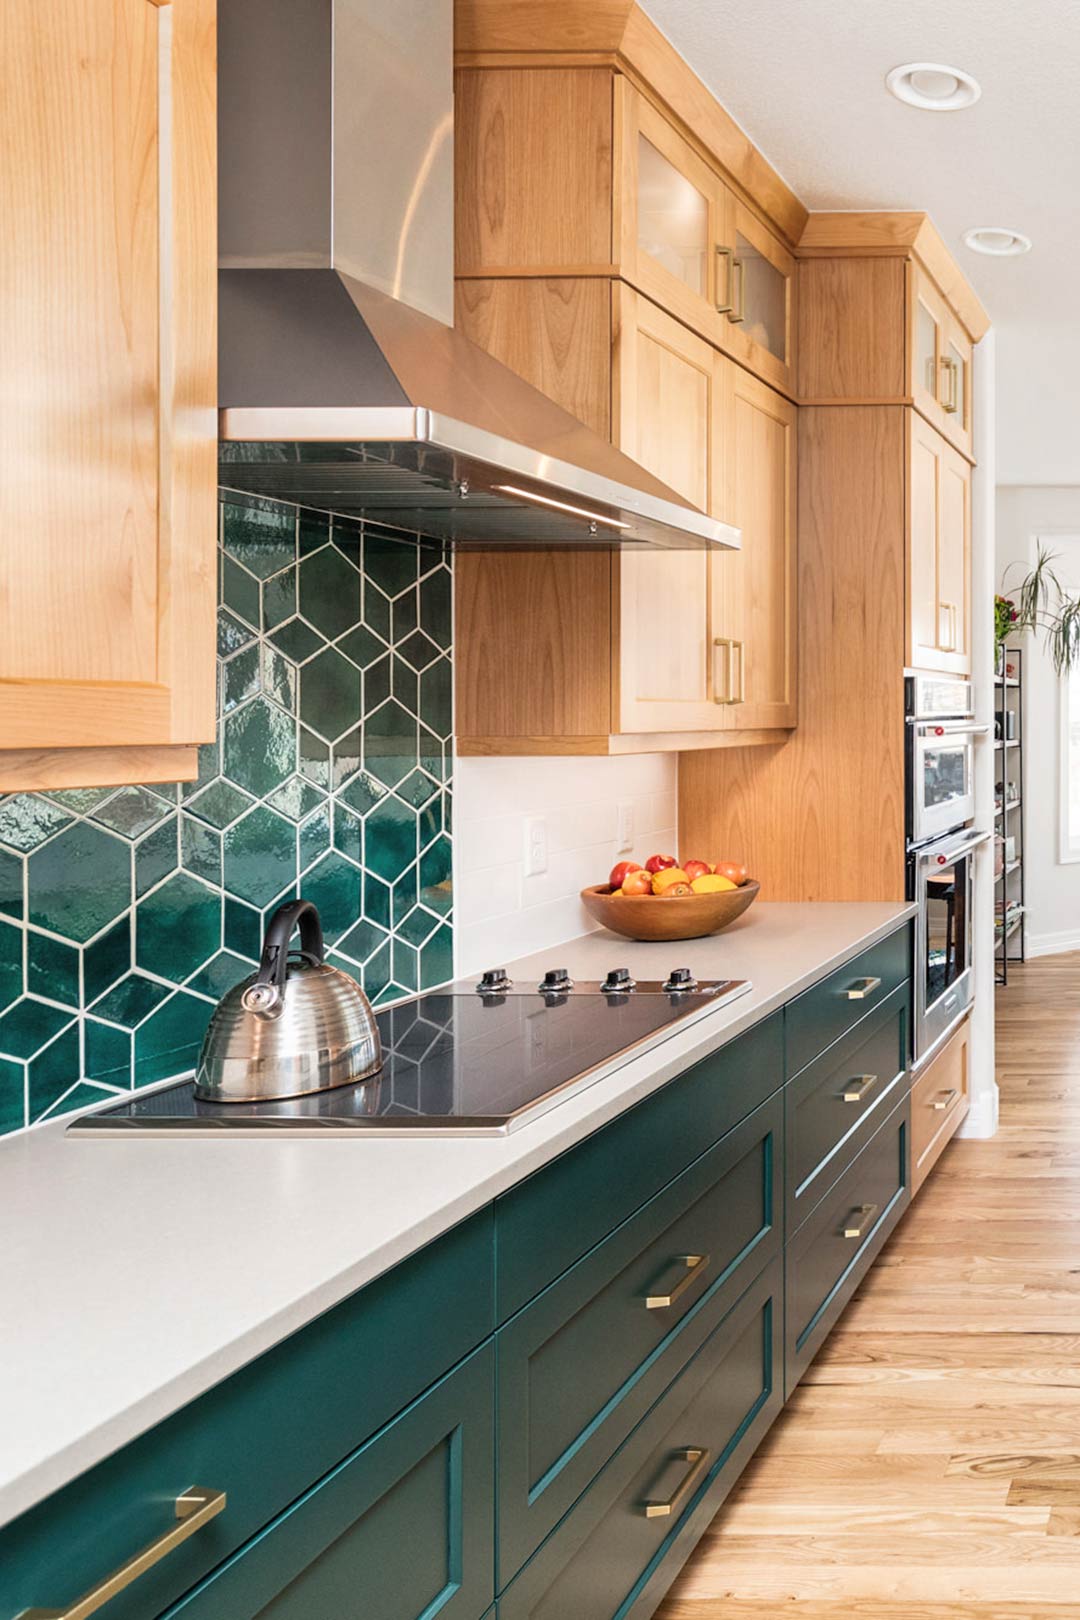 Custom green tile oven backsplash installed to mimic the vibrant green color used on the cabinets